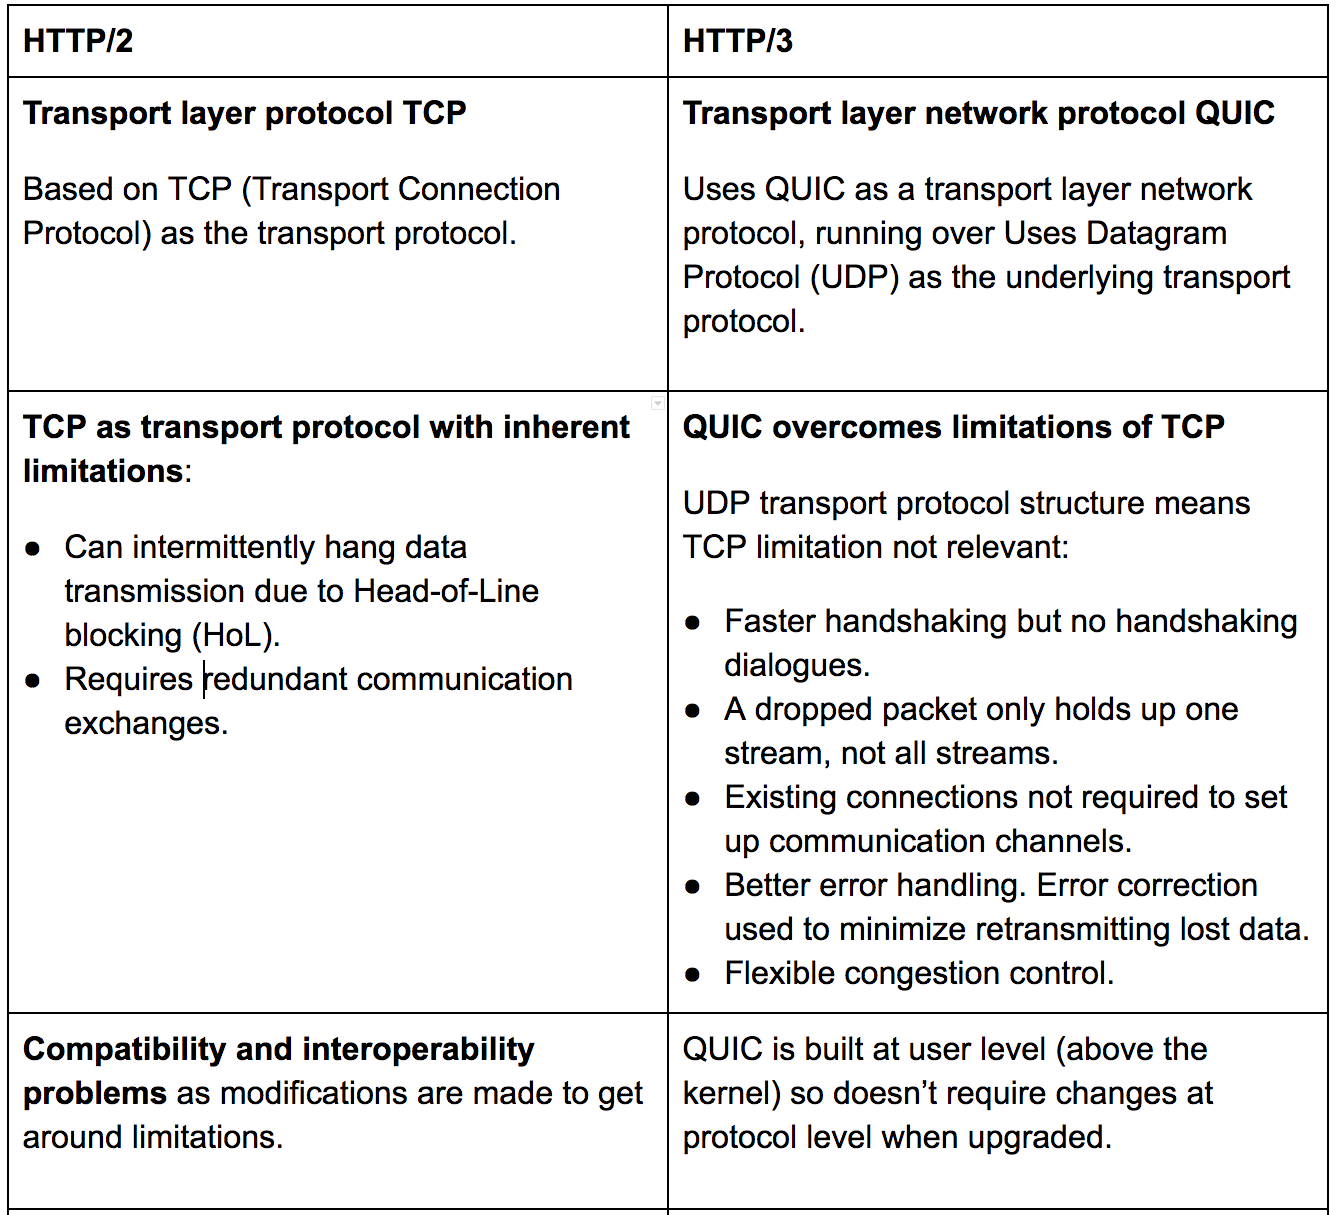 Features and capabilities of HTTP/2 and HTTP/3 Part 1/2